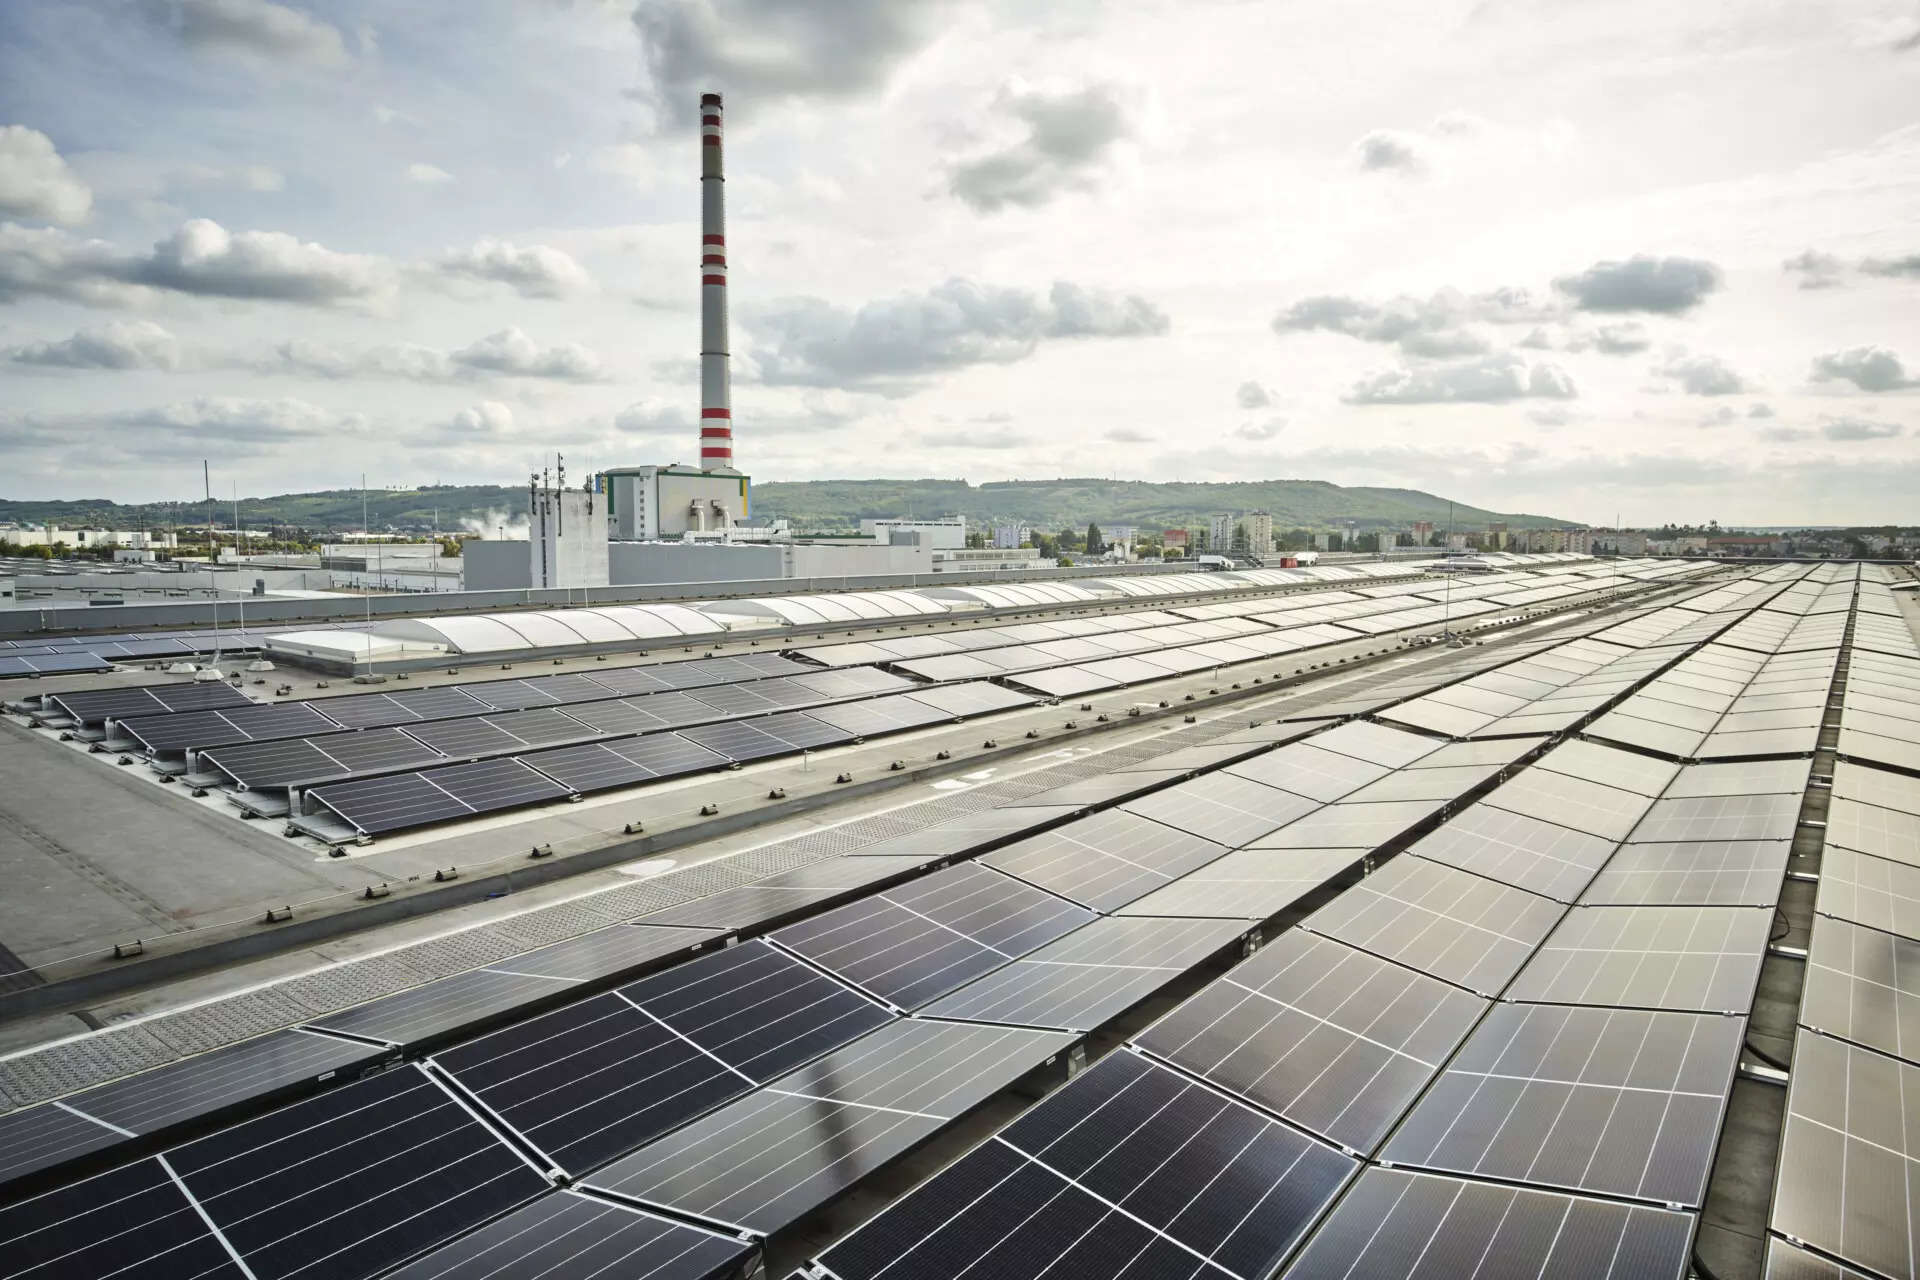 Skoda Auto Carbon Neutral: New solar systems to help carbon-neutral  production efforts of Skoda Auto, ET Auto